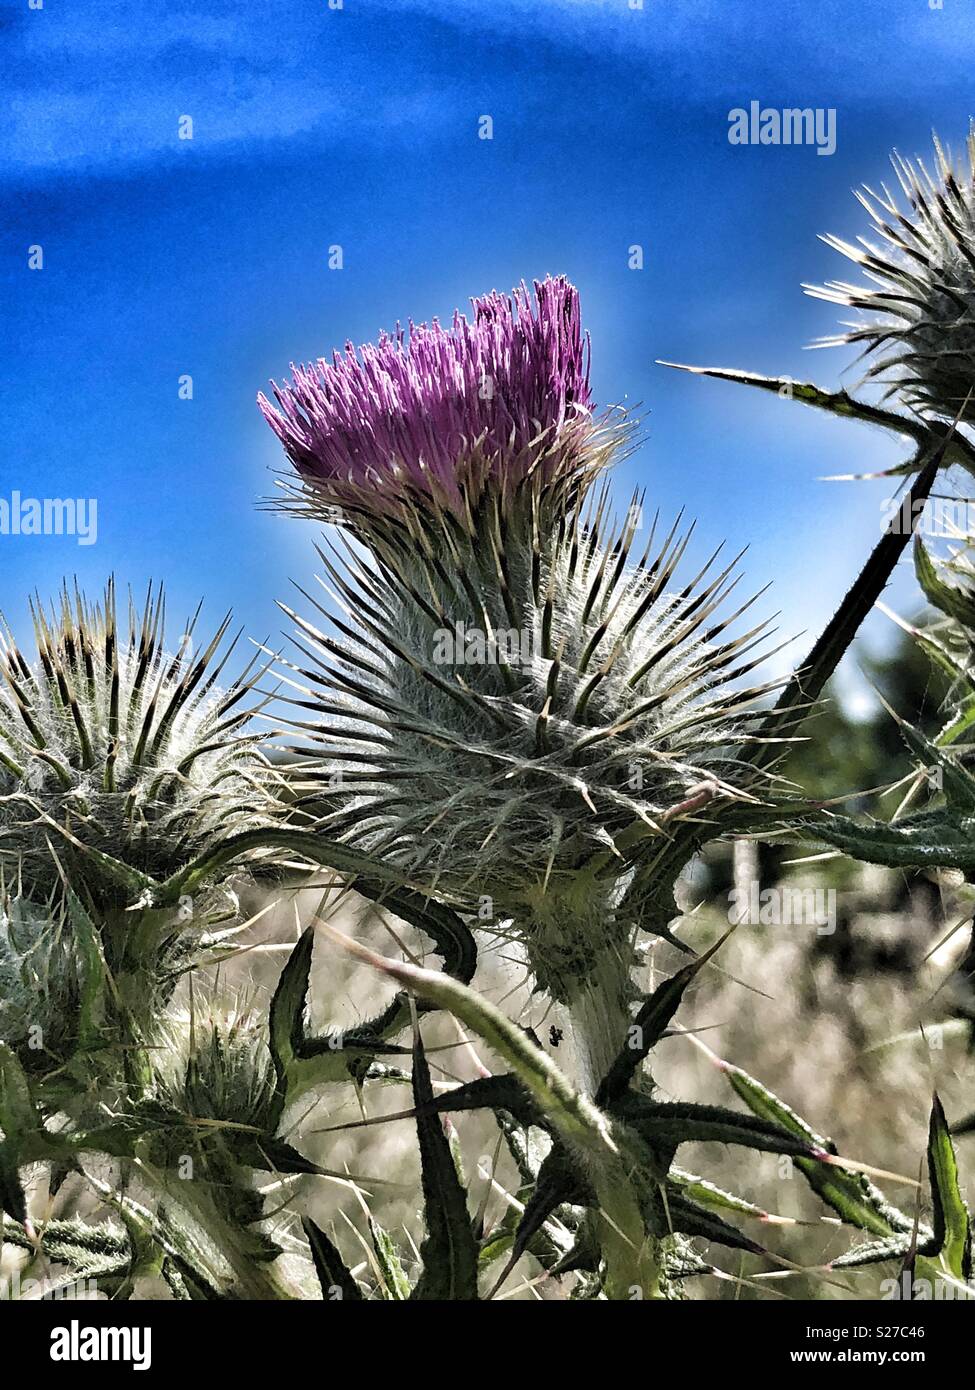 Prickly purple Spear thistle in flower with blue sky Stock Photo